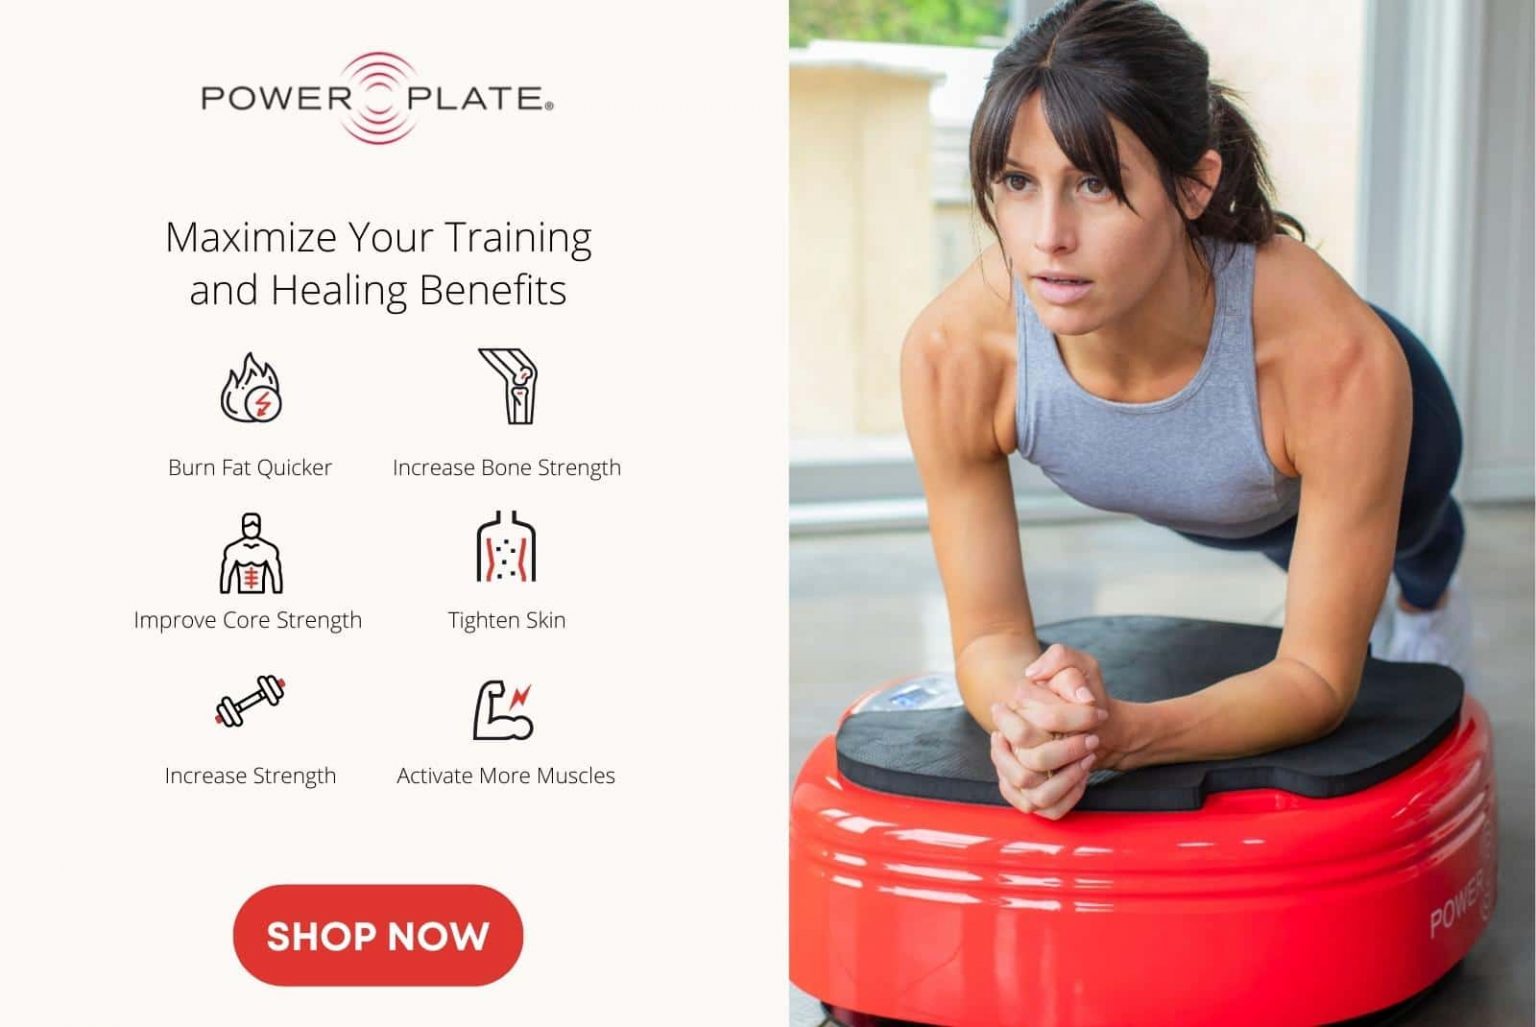 Maximize your training and health benefits with the Power Plate MOVE